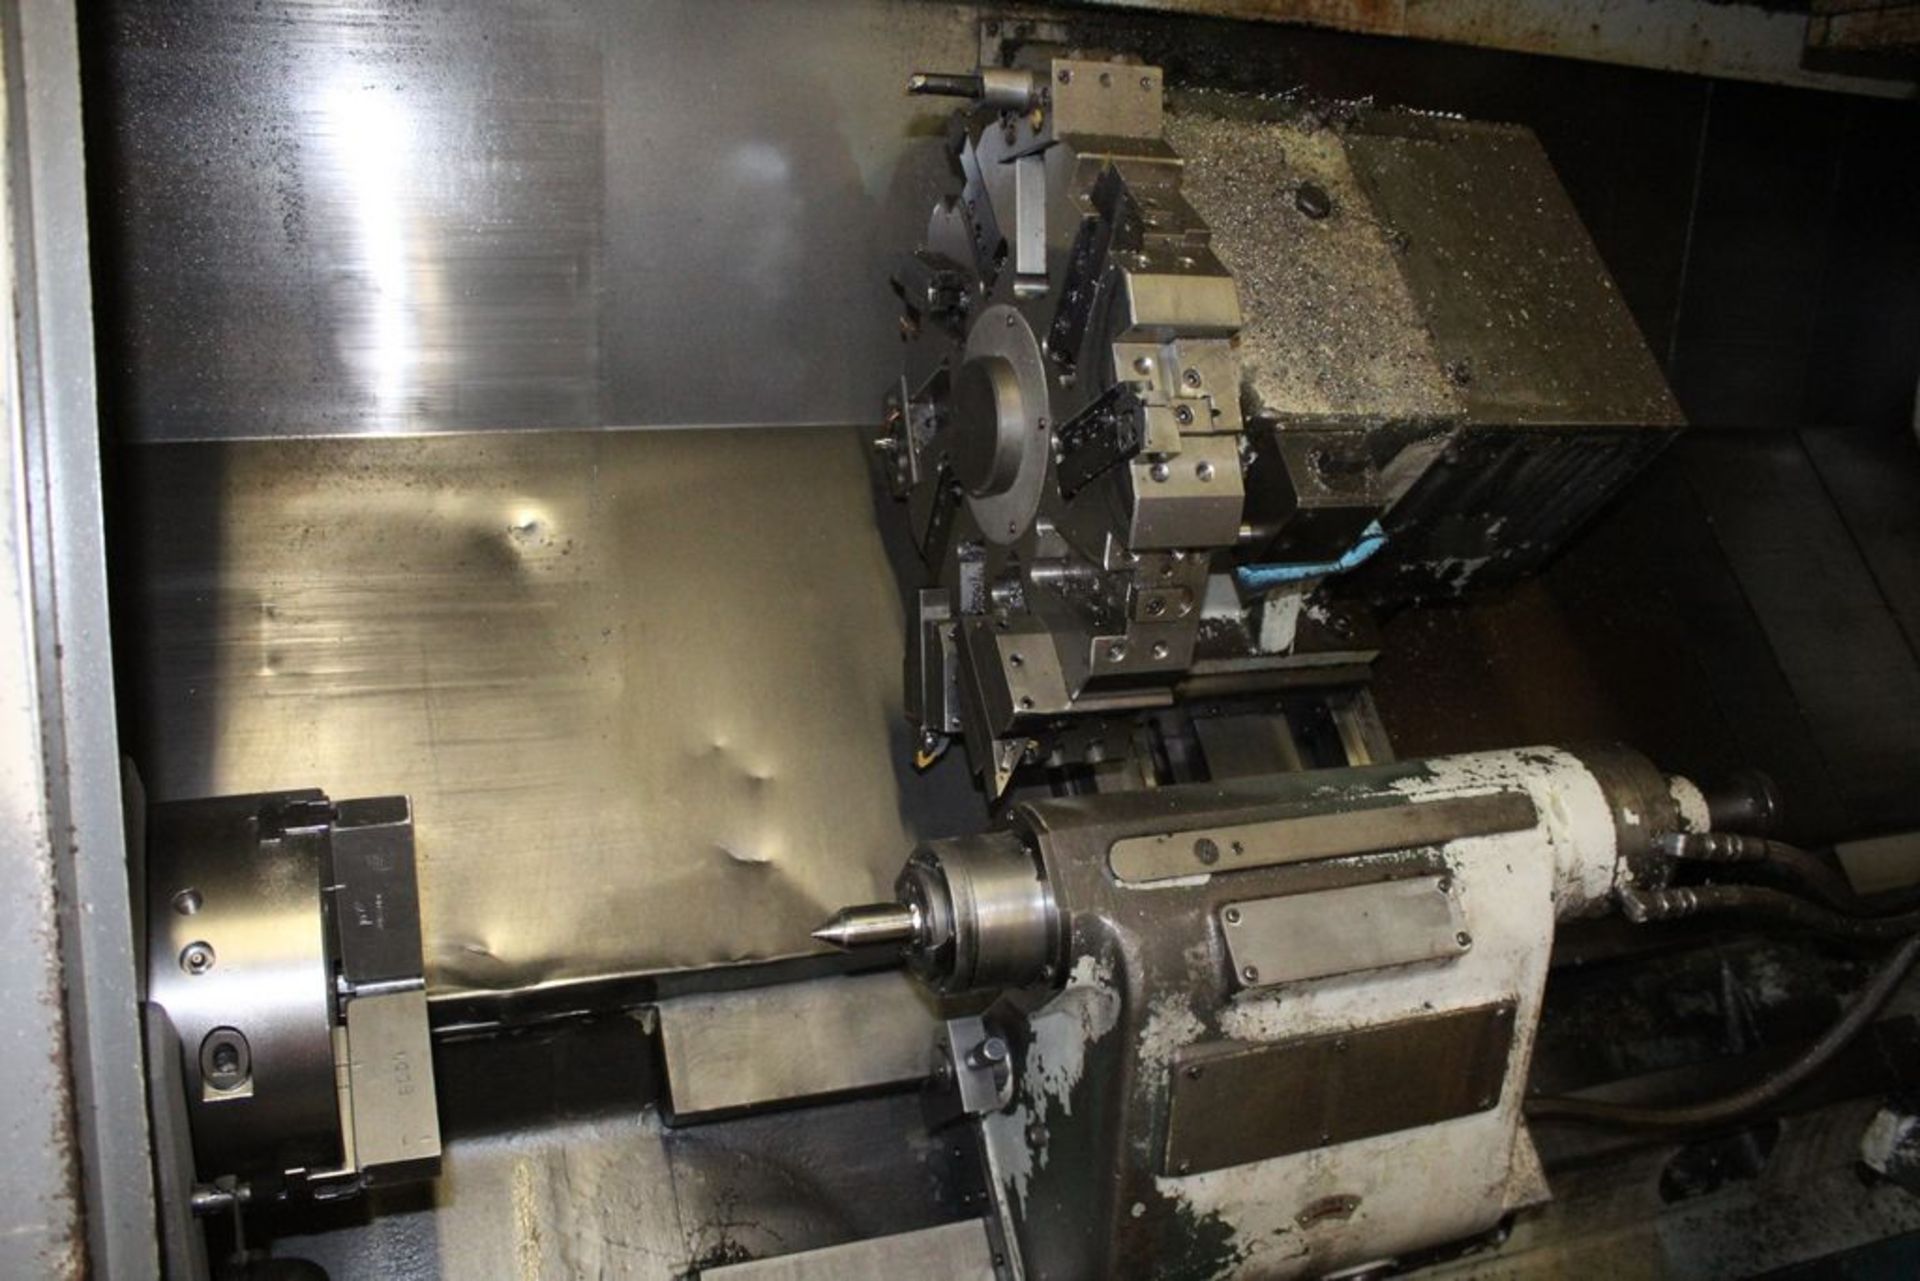 MORI SEIKI MODEL SL-25 CNC TURNING CENTER, S/N 6521, 10ö 3-JAW CHUCK, TAILSTOCK, MF-T6 CONTROL, WITH - Image 2 of 6